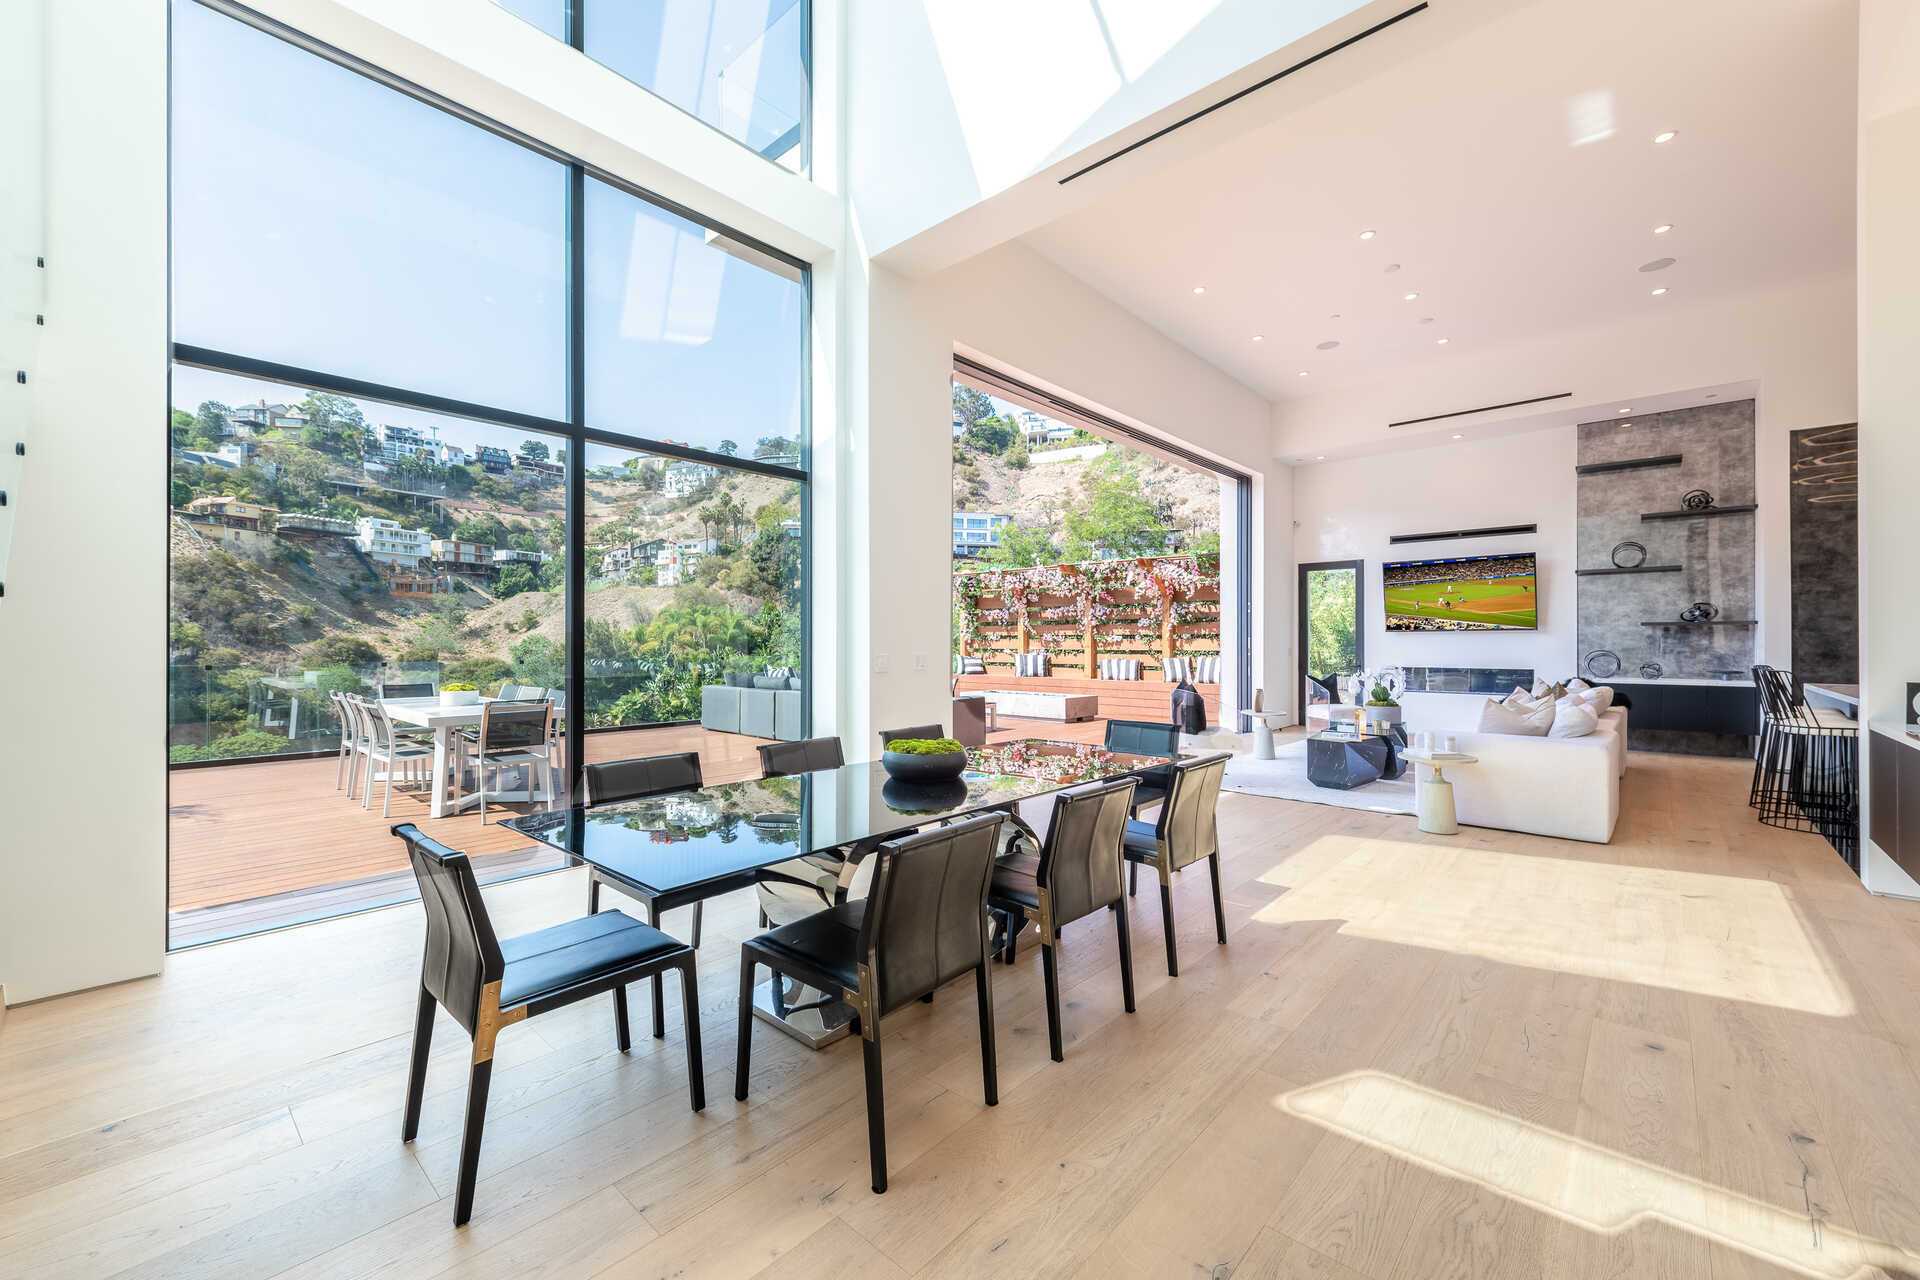 This-6350000-Newly-Constructed-Los-Angeles-Home-is-the-Ultimate-Hollywood-Hills-Haven-5